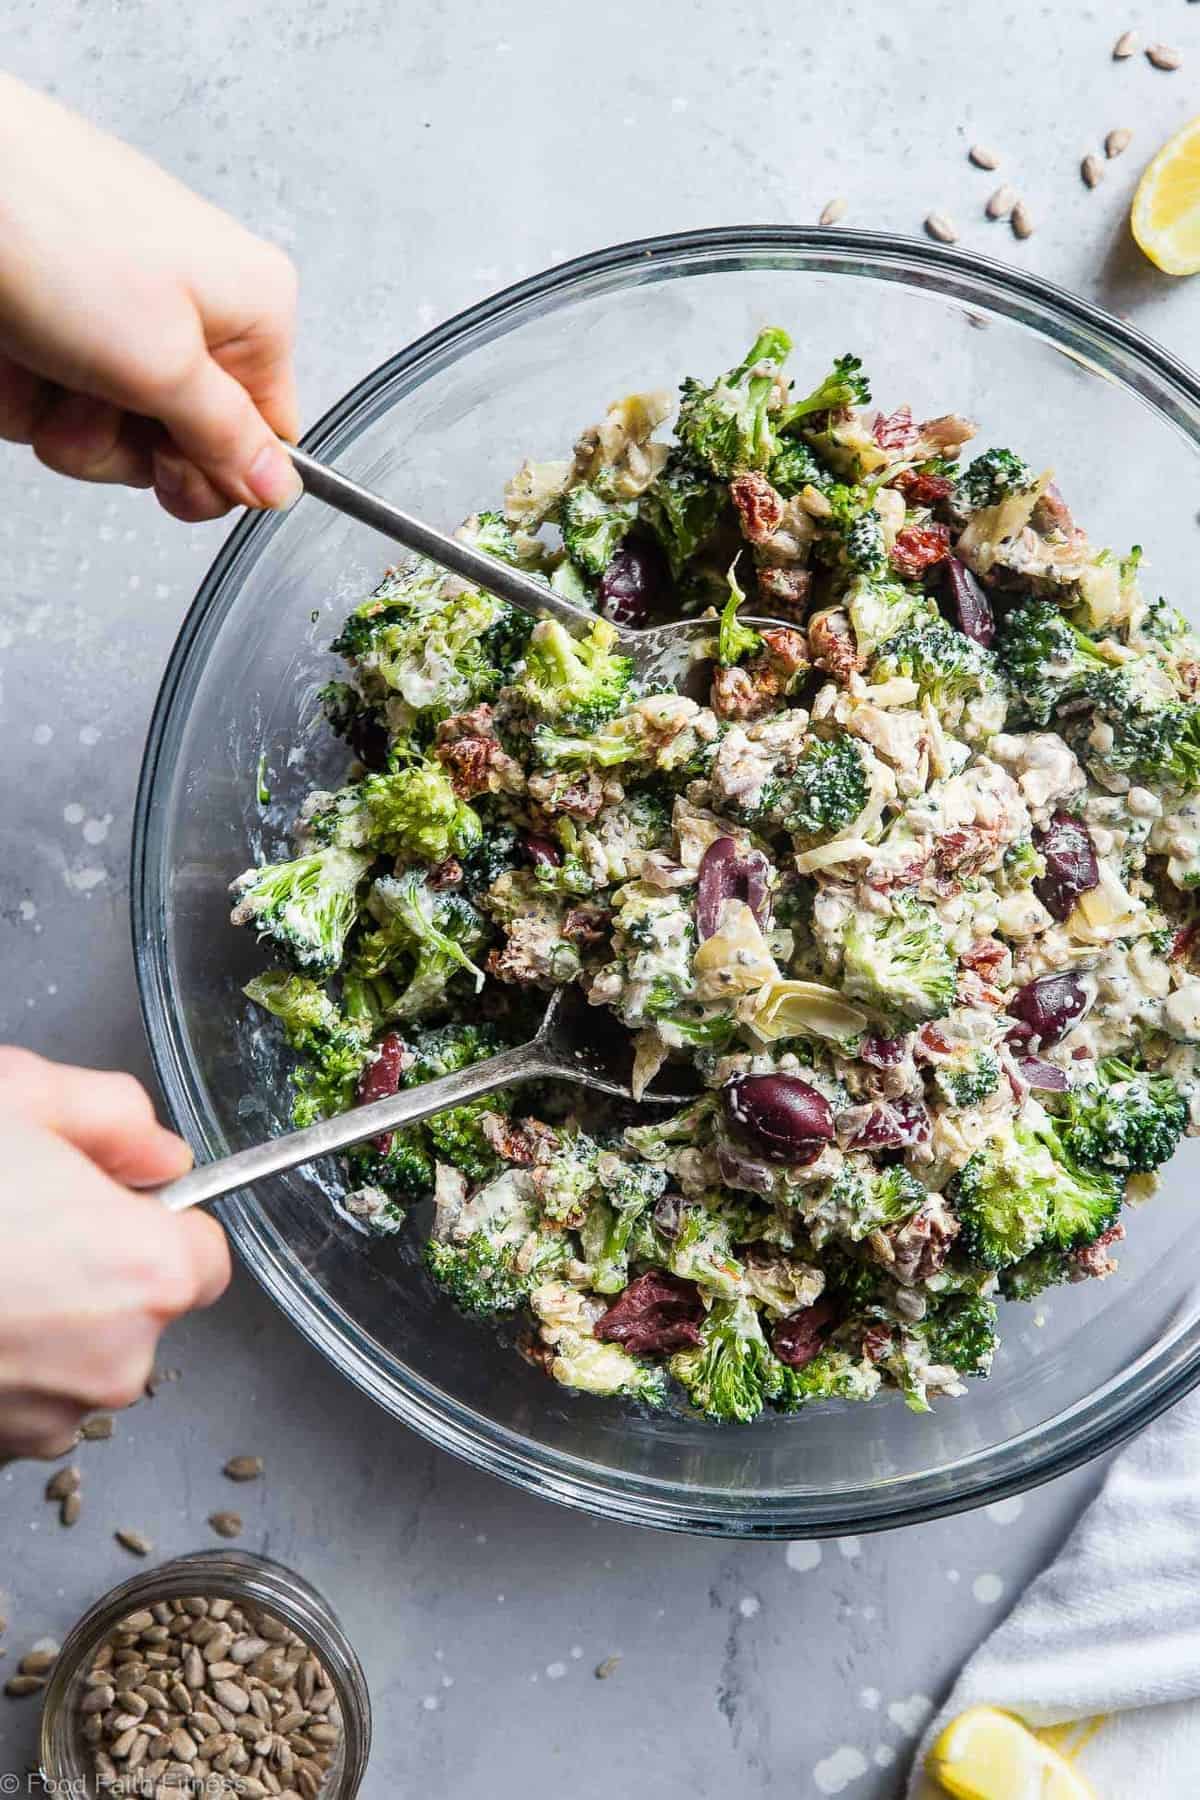 Mediterranean Low Carb Broccoli Salad - This Low Carb Broccoli Salad, with a Greek twist, is a super easy, healthy and protein packed side dish for dinner or a potluck! It's made with Greek yogurt and you won't even miss the mayo! | #Foodfaithfitness | #Lowcarb #Keto #Glutenfree #Healthy